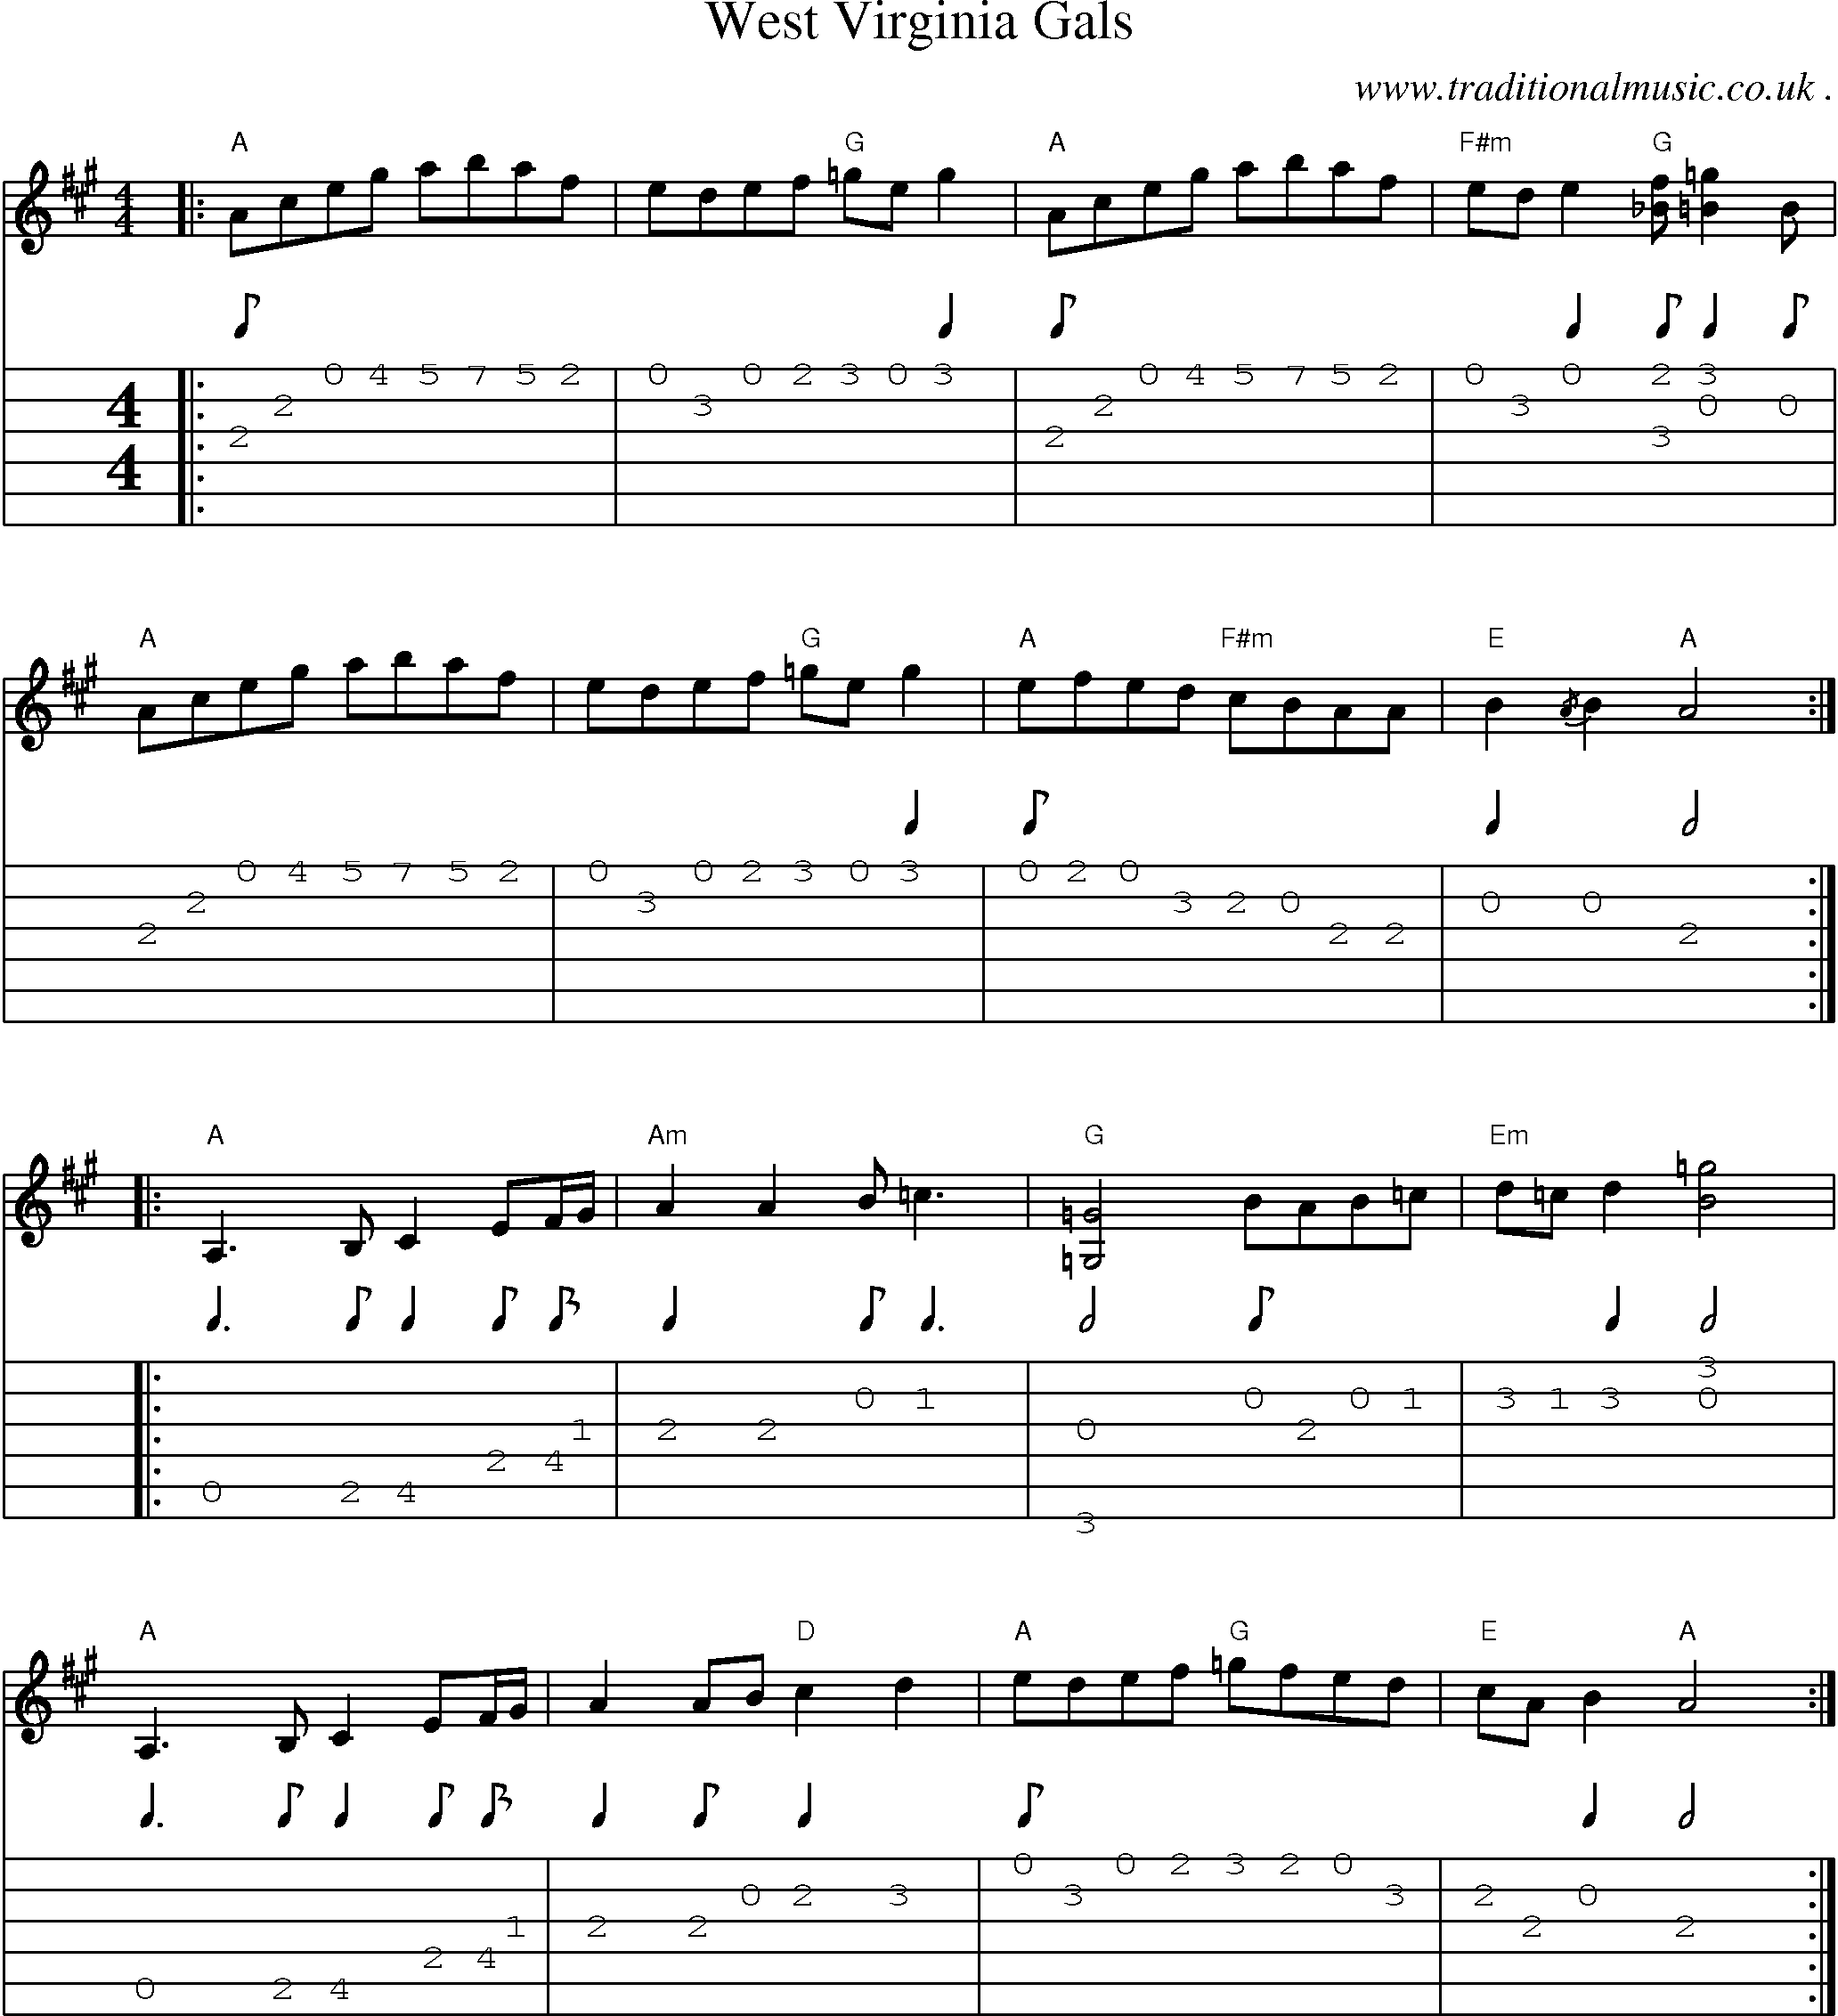 Music Score and Guitar Tabs for West Virginia Gals